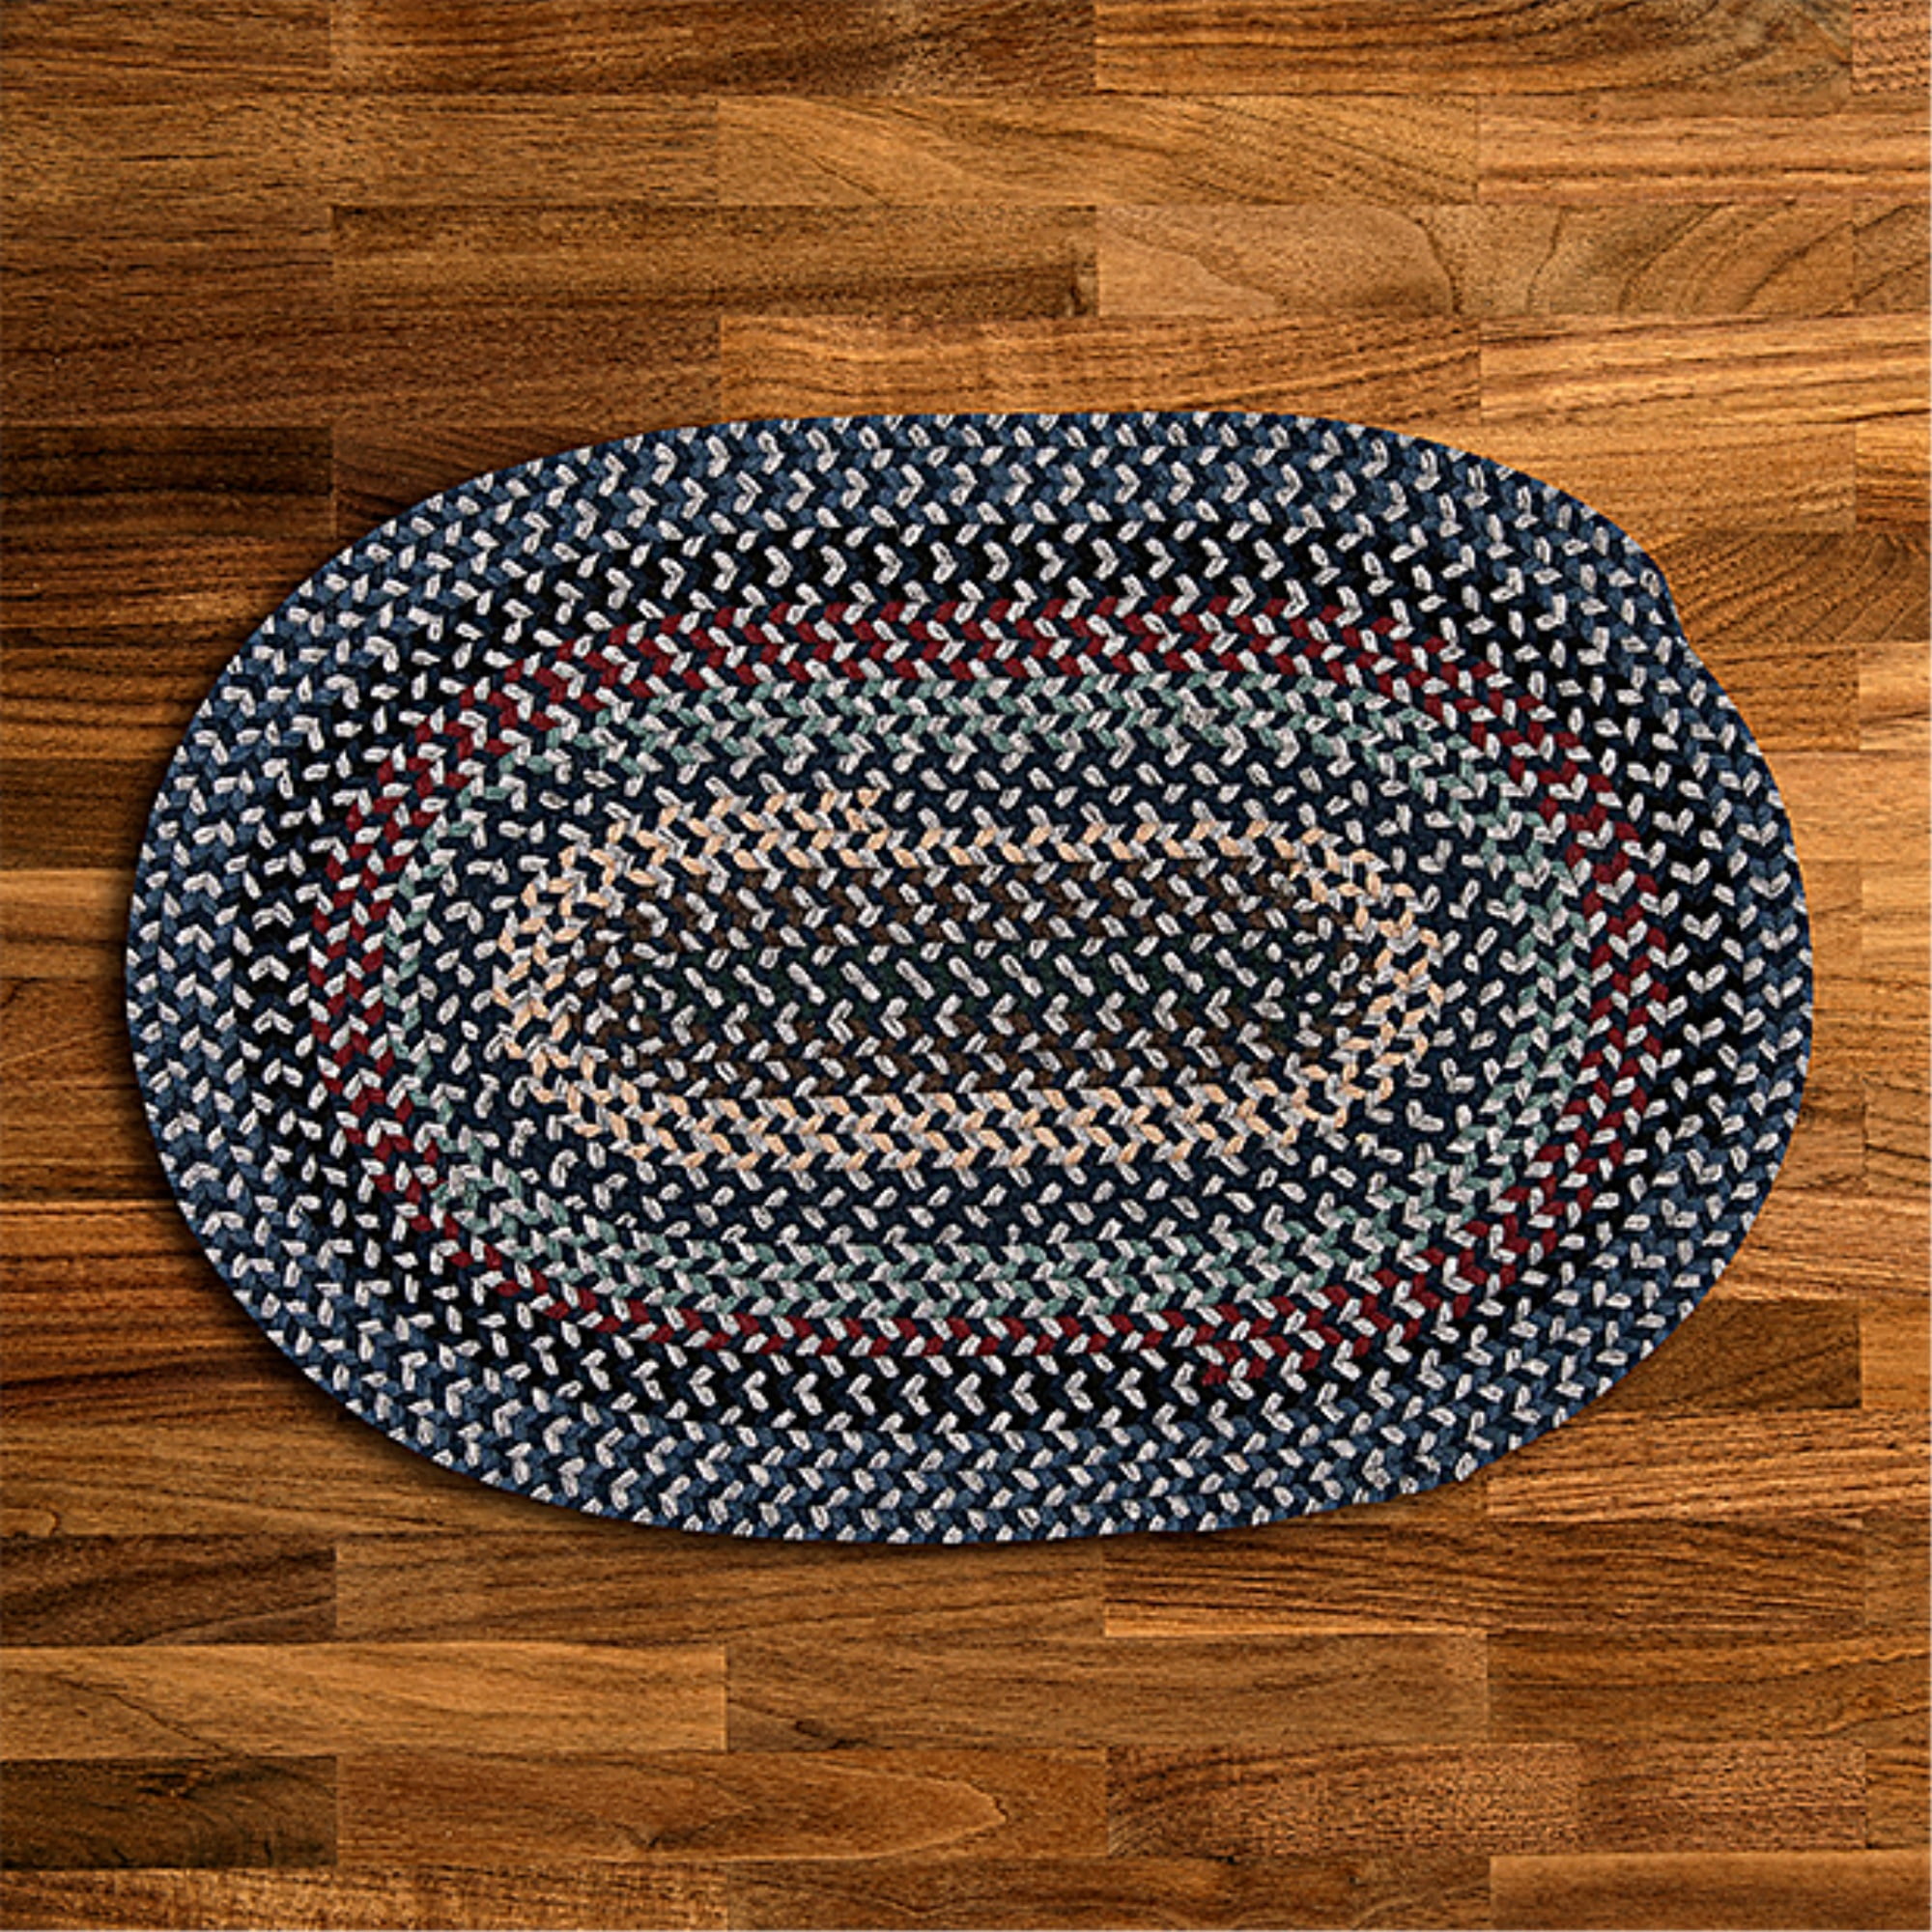 Bc53r024x084 2 X 7 Ft. Boston Common Oval Rug, Capeside Blue